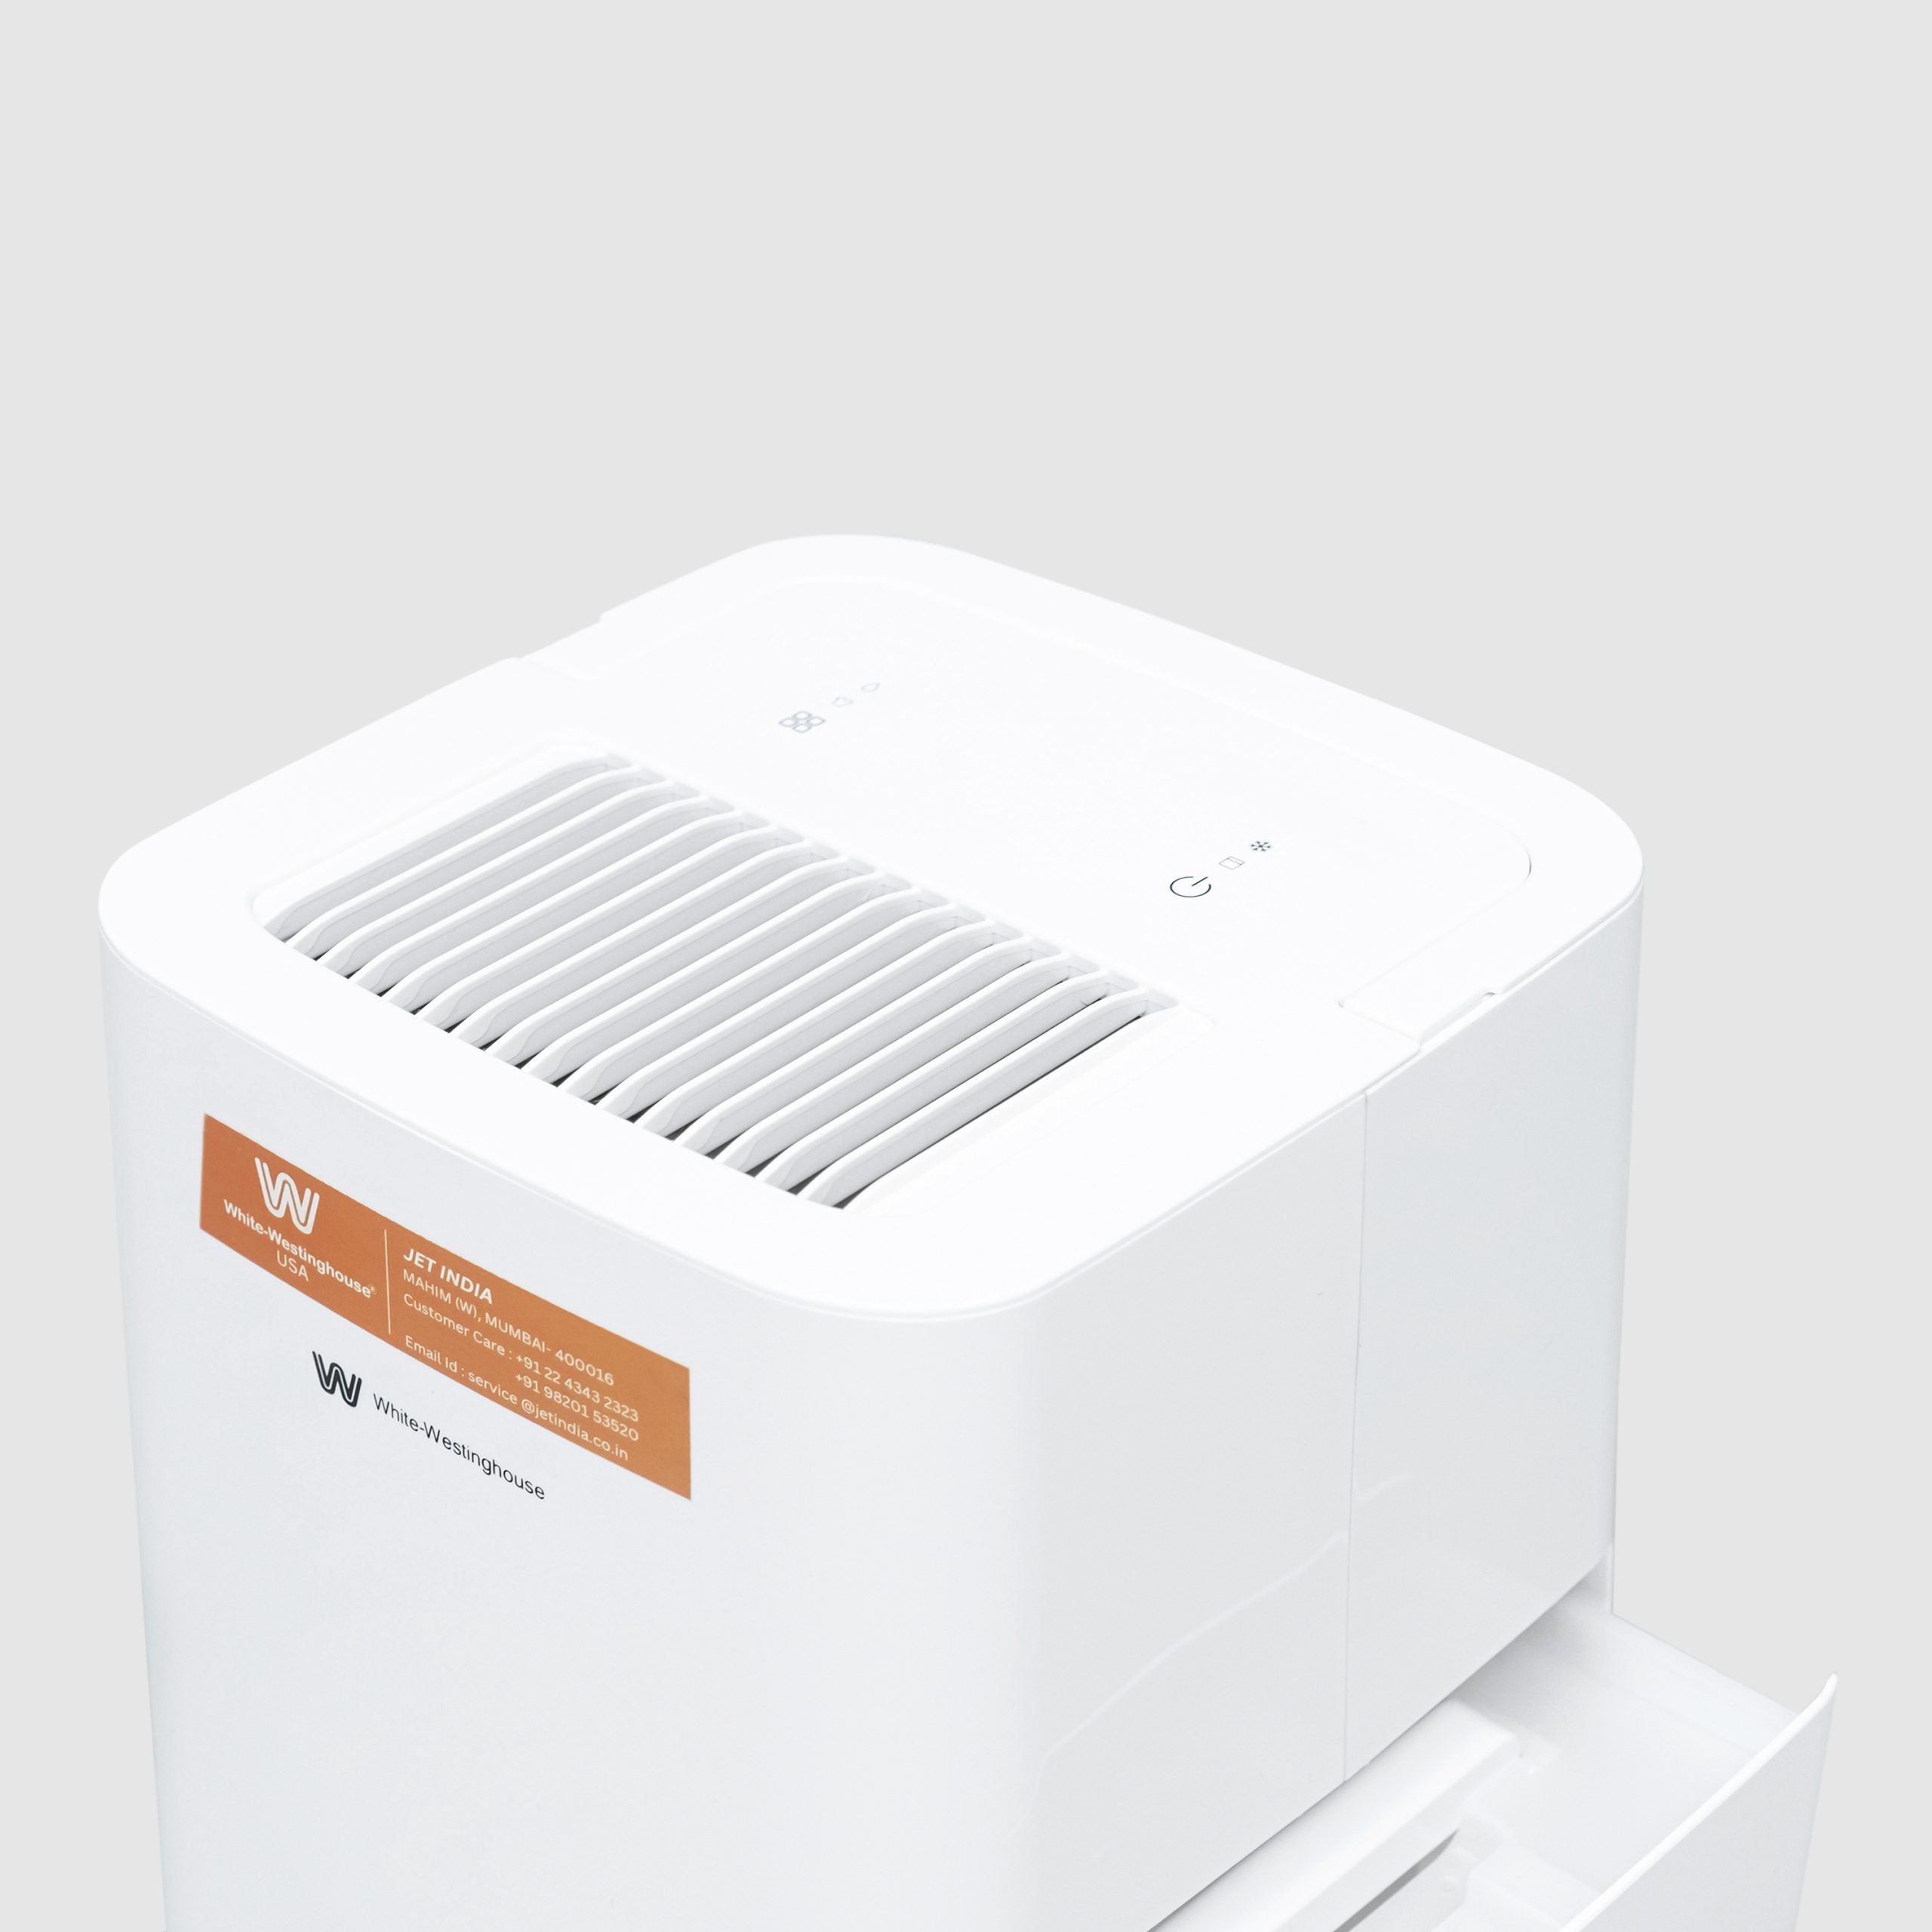 Top angled view of the White Westinghouse Dehumidifier AWHD123L, showcasing the air vent, control panel, and sleek white design. The unit is suitable for maintaining optimal humidity levels in residential and commercial spaces.